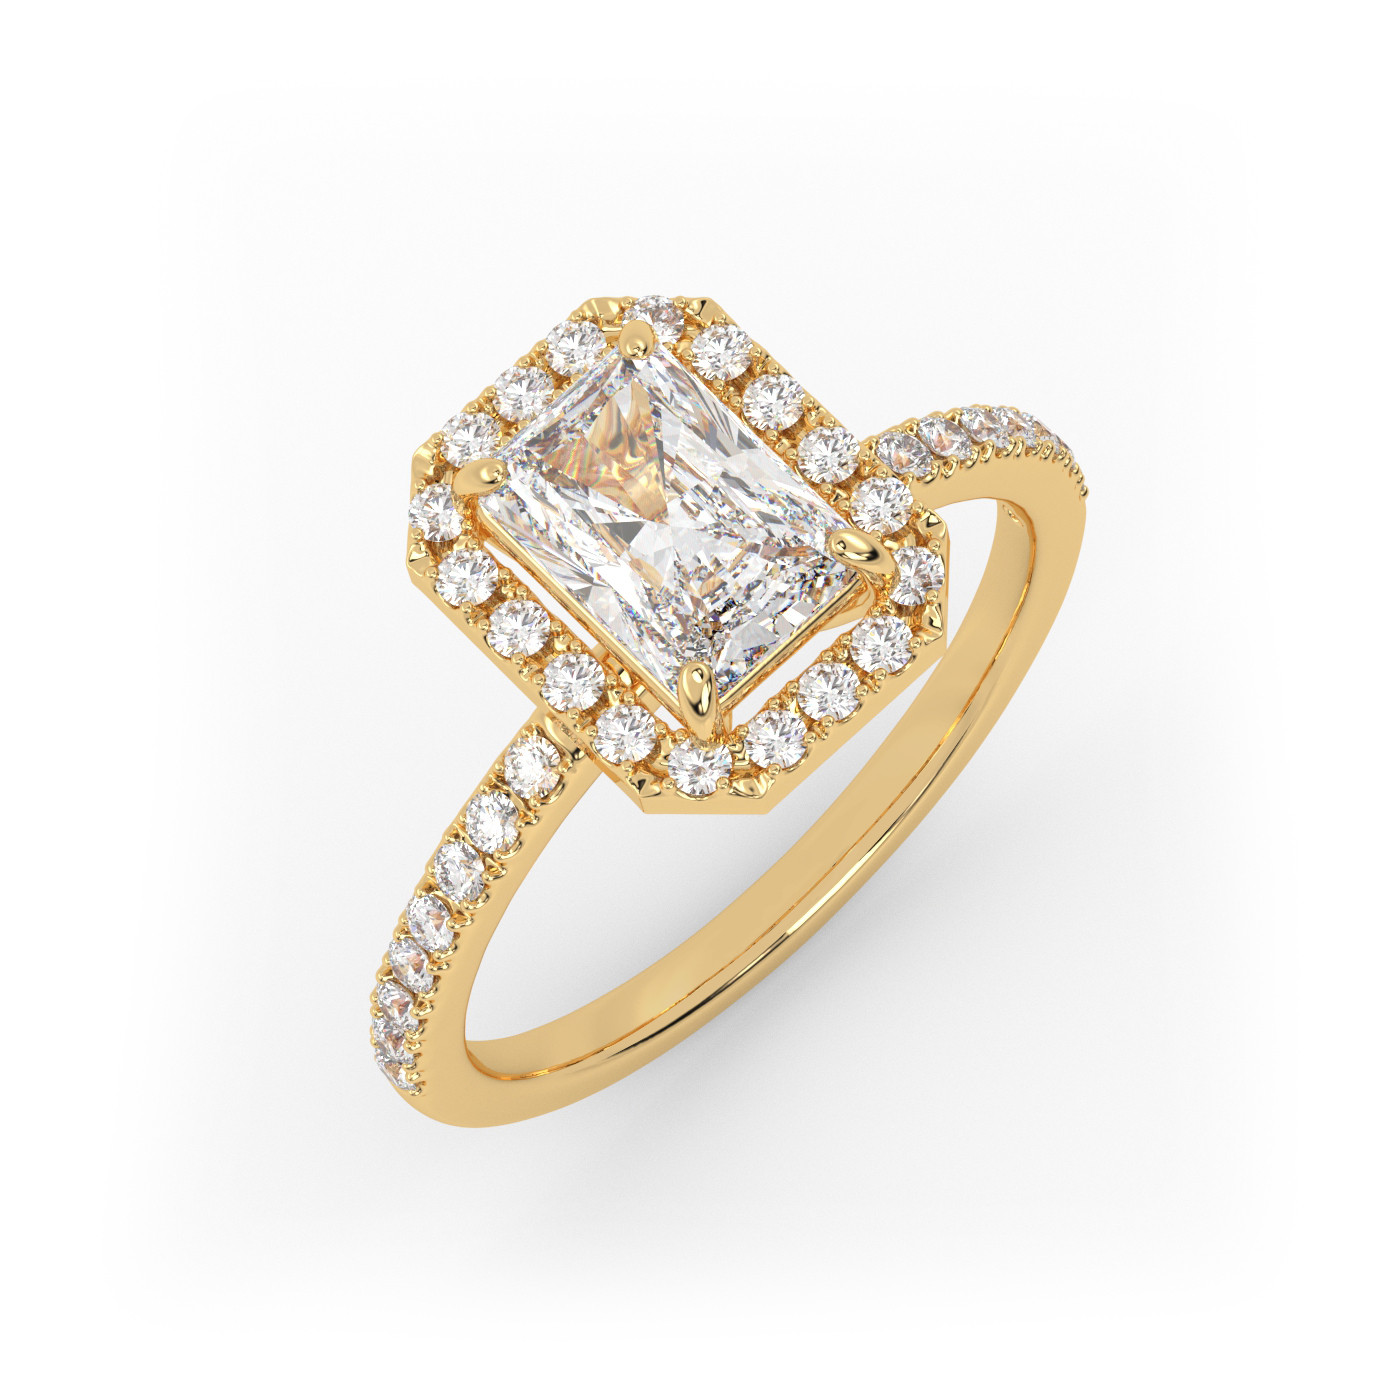 18K YELLOW GOLD Radiant Cut Diamond engagement Ring with Halo and Pave style